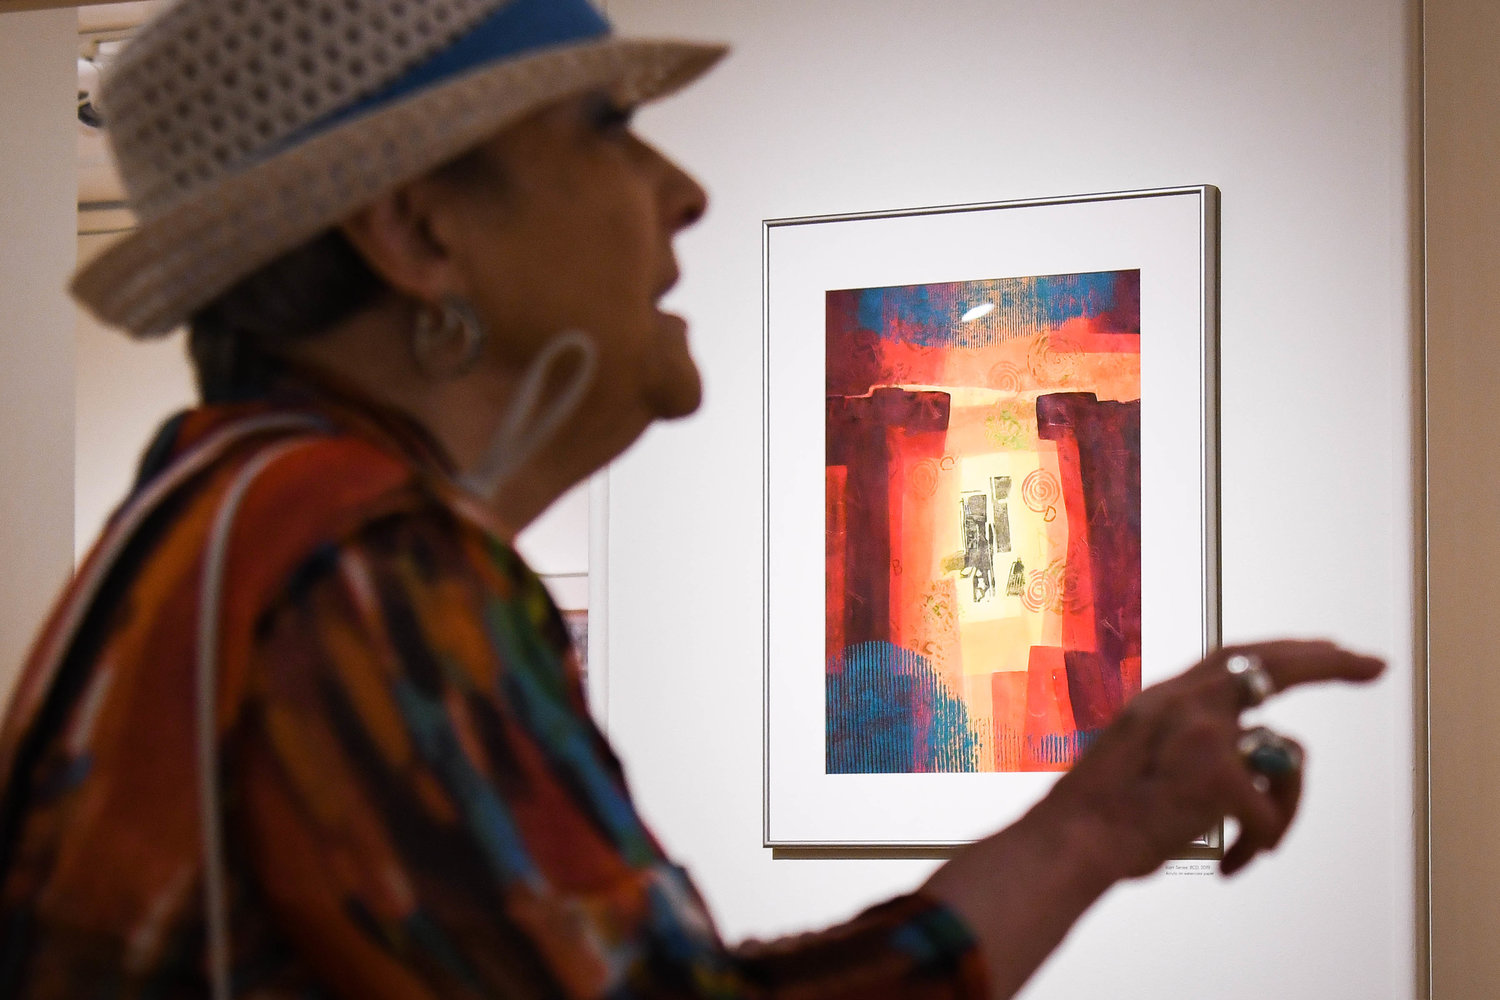 Sandra Z. De Visser talks about her exhibition celebrating her 40-plus year career as an artist and educator in the Mohawk Valley while at Munson-Williams-Proctor Arts Institute in Utica.